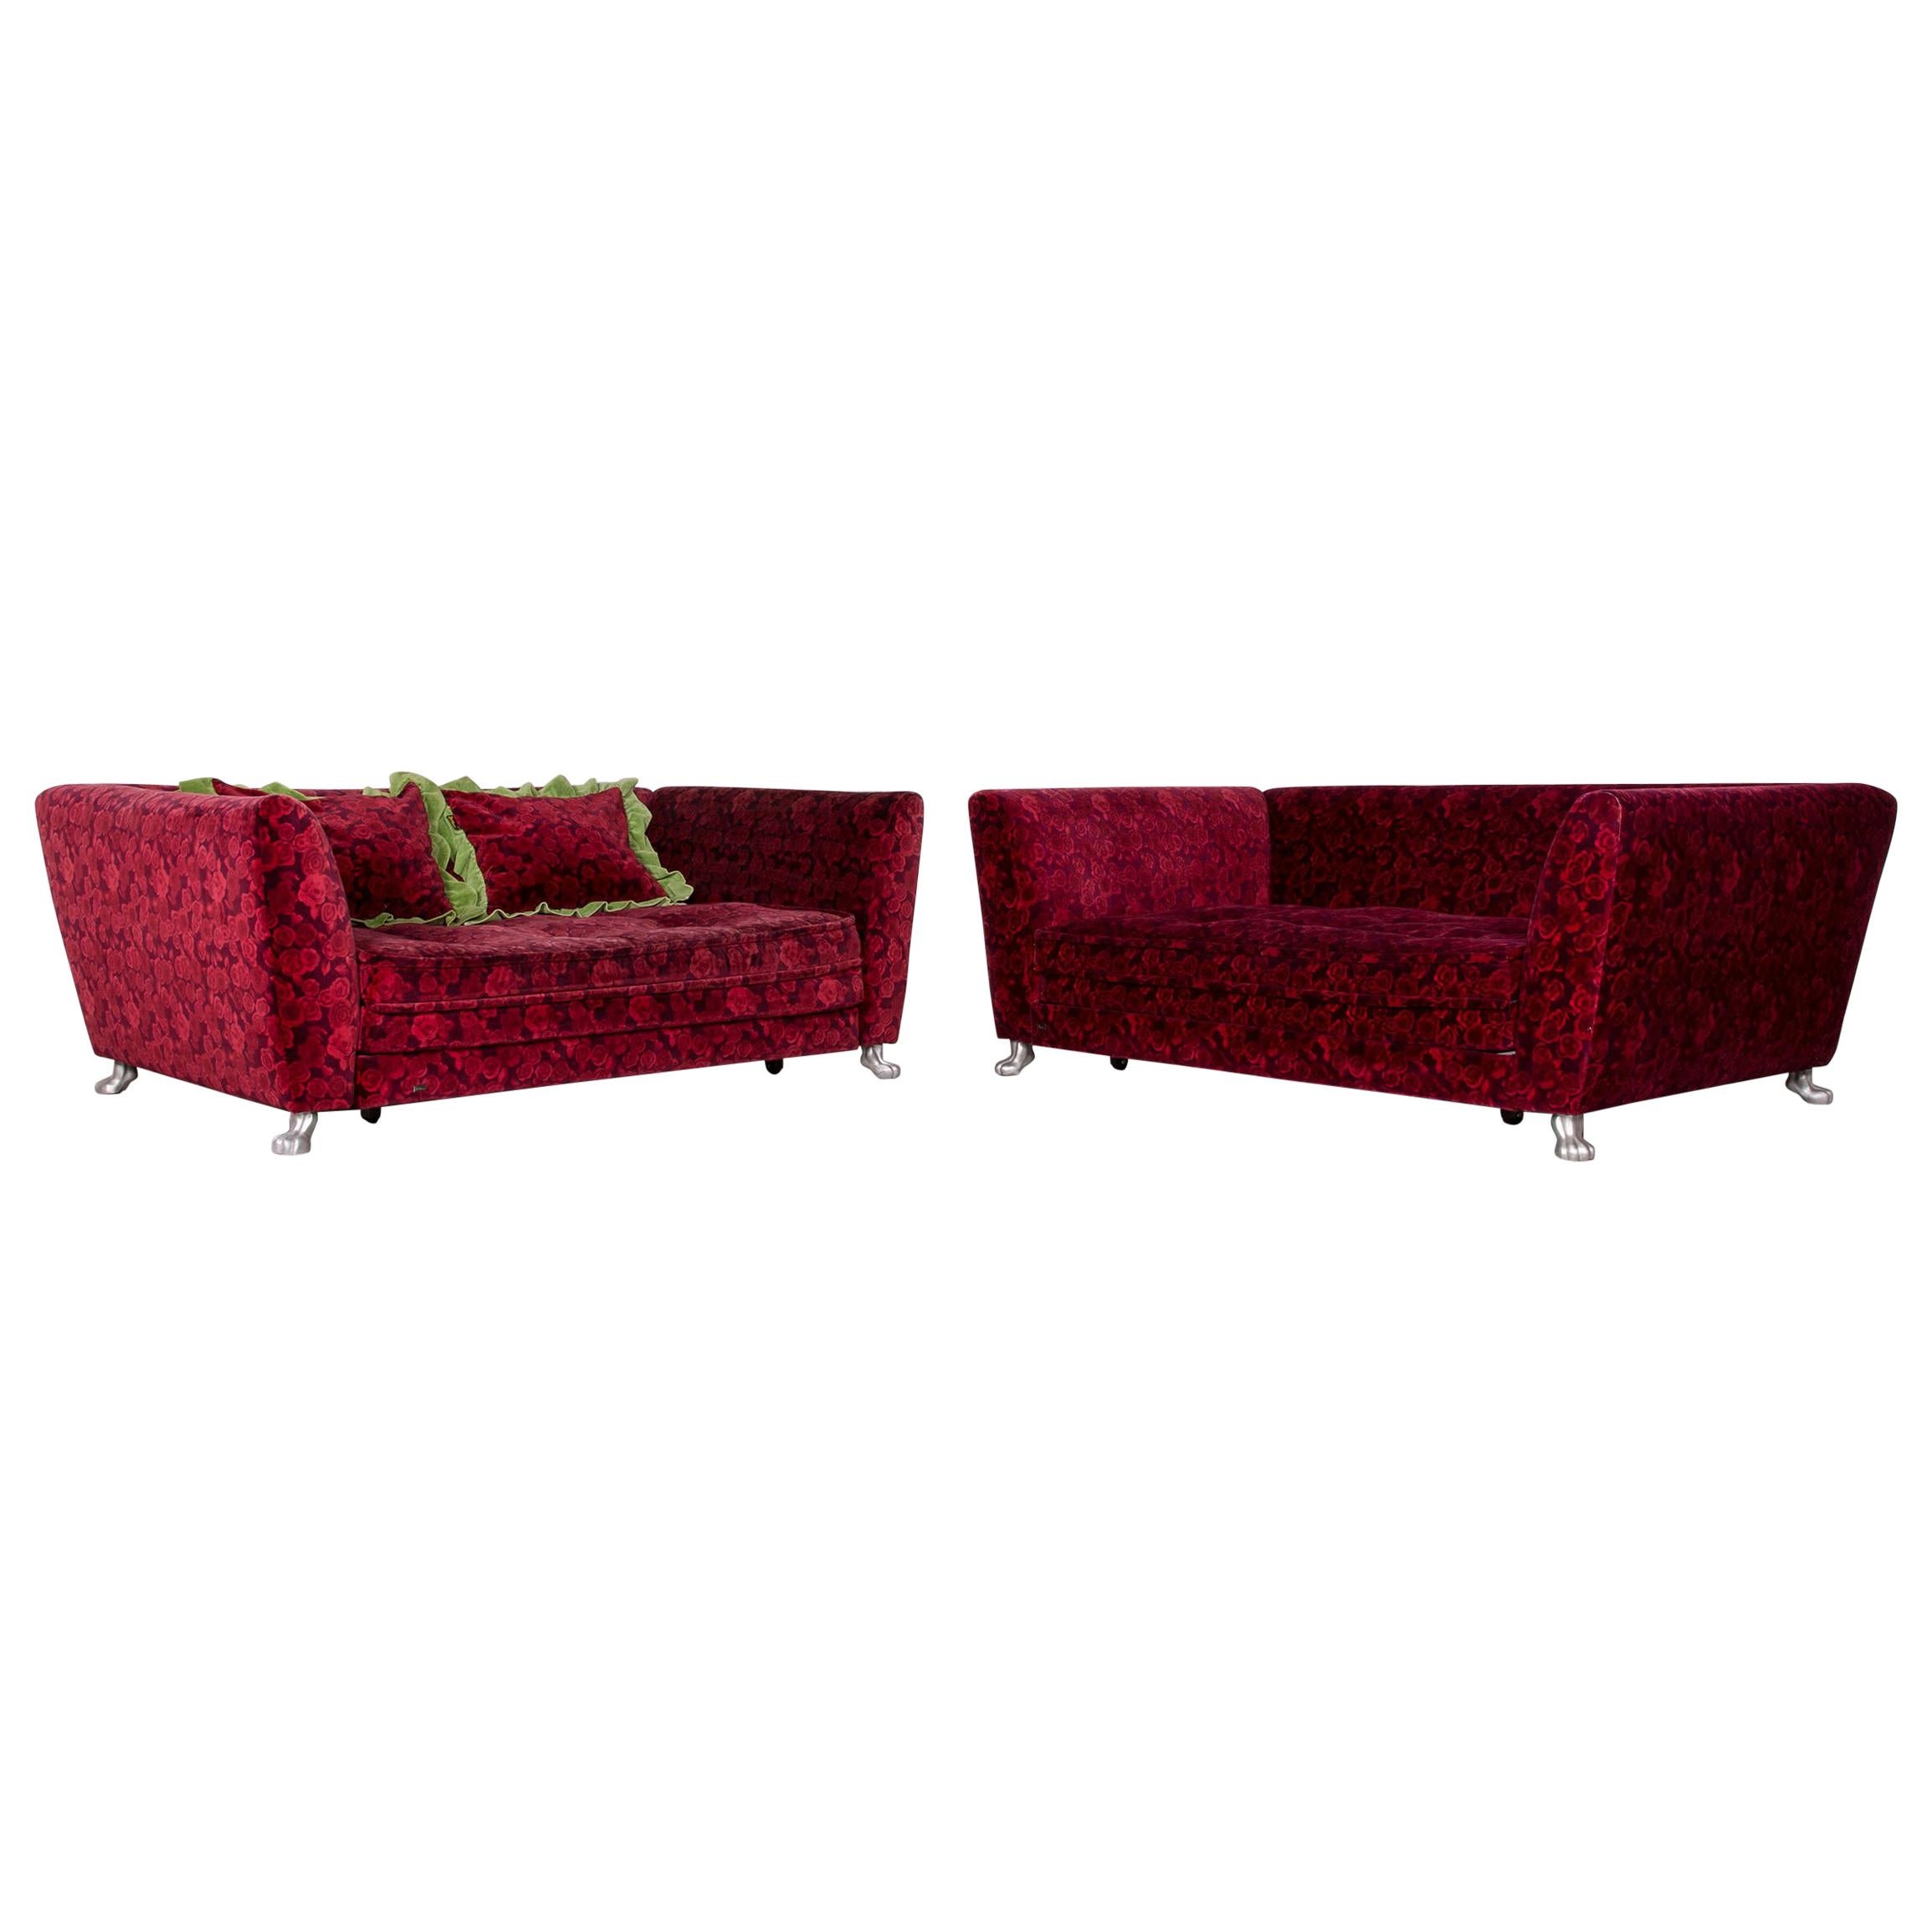 Bretz Monster Fabric Sofa Red Three-Seat Couch Function Sofa Set For Sale